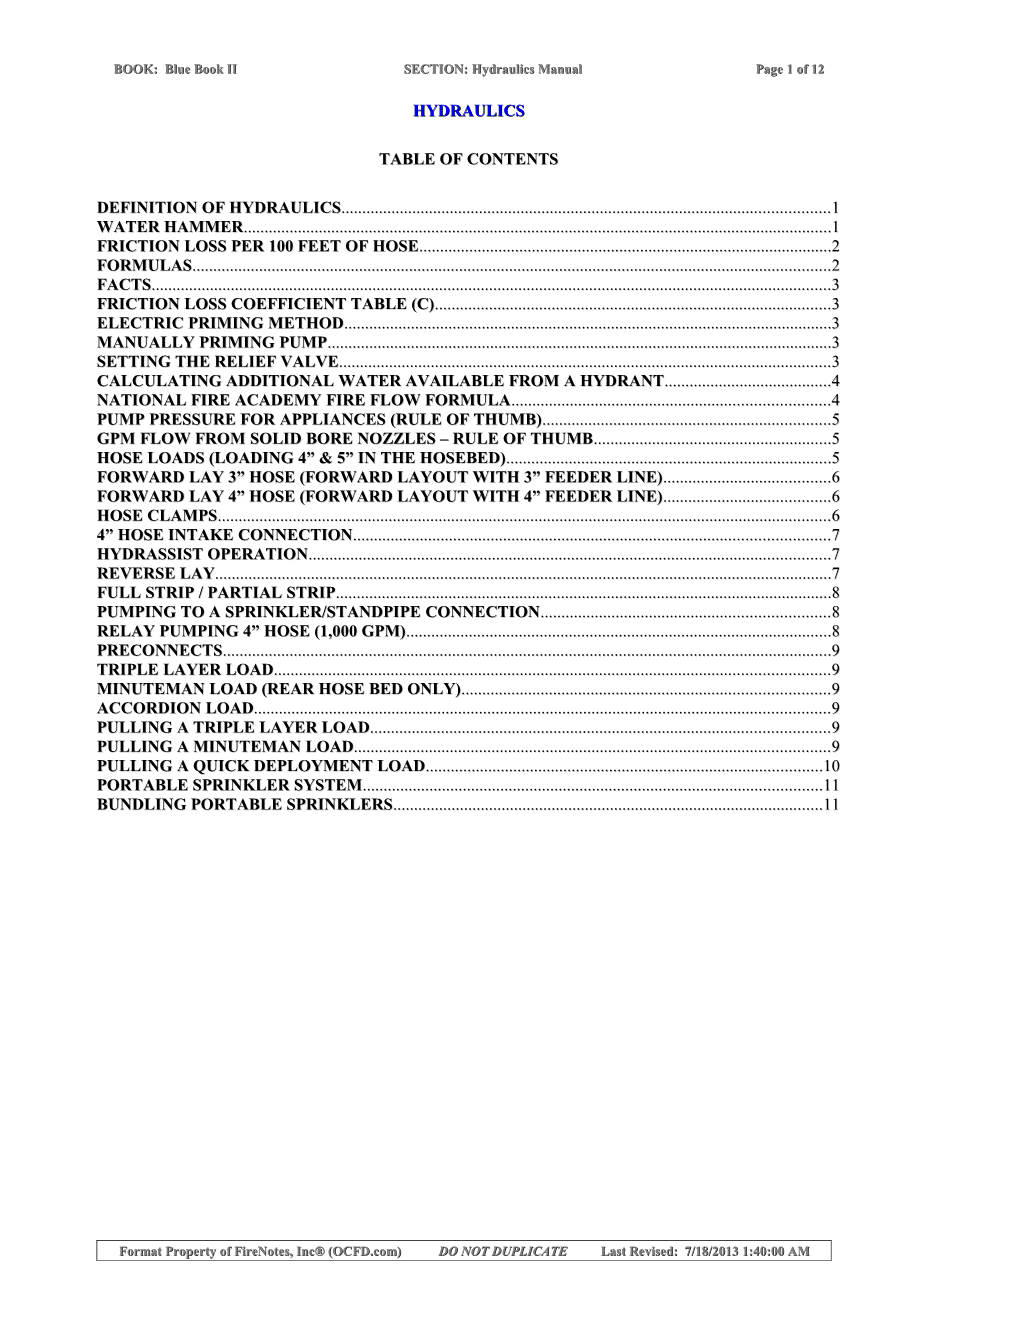 BOOK: Blue Book II SECTION: Hydraulics Manual Page 1 of 10